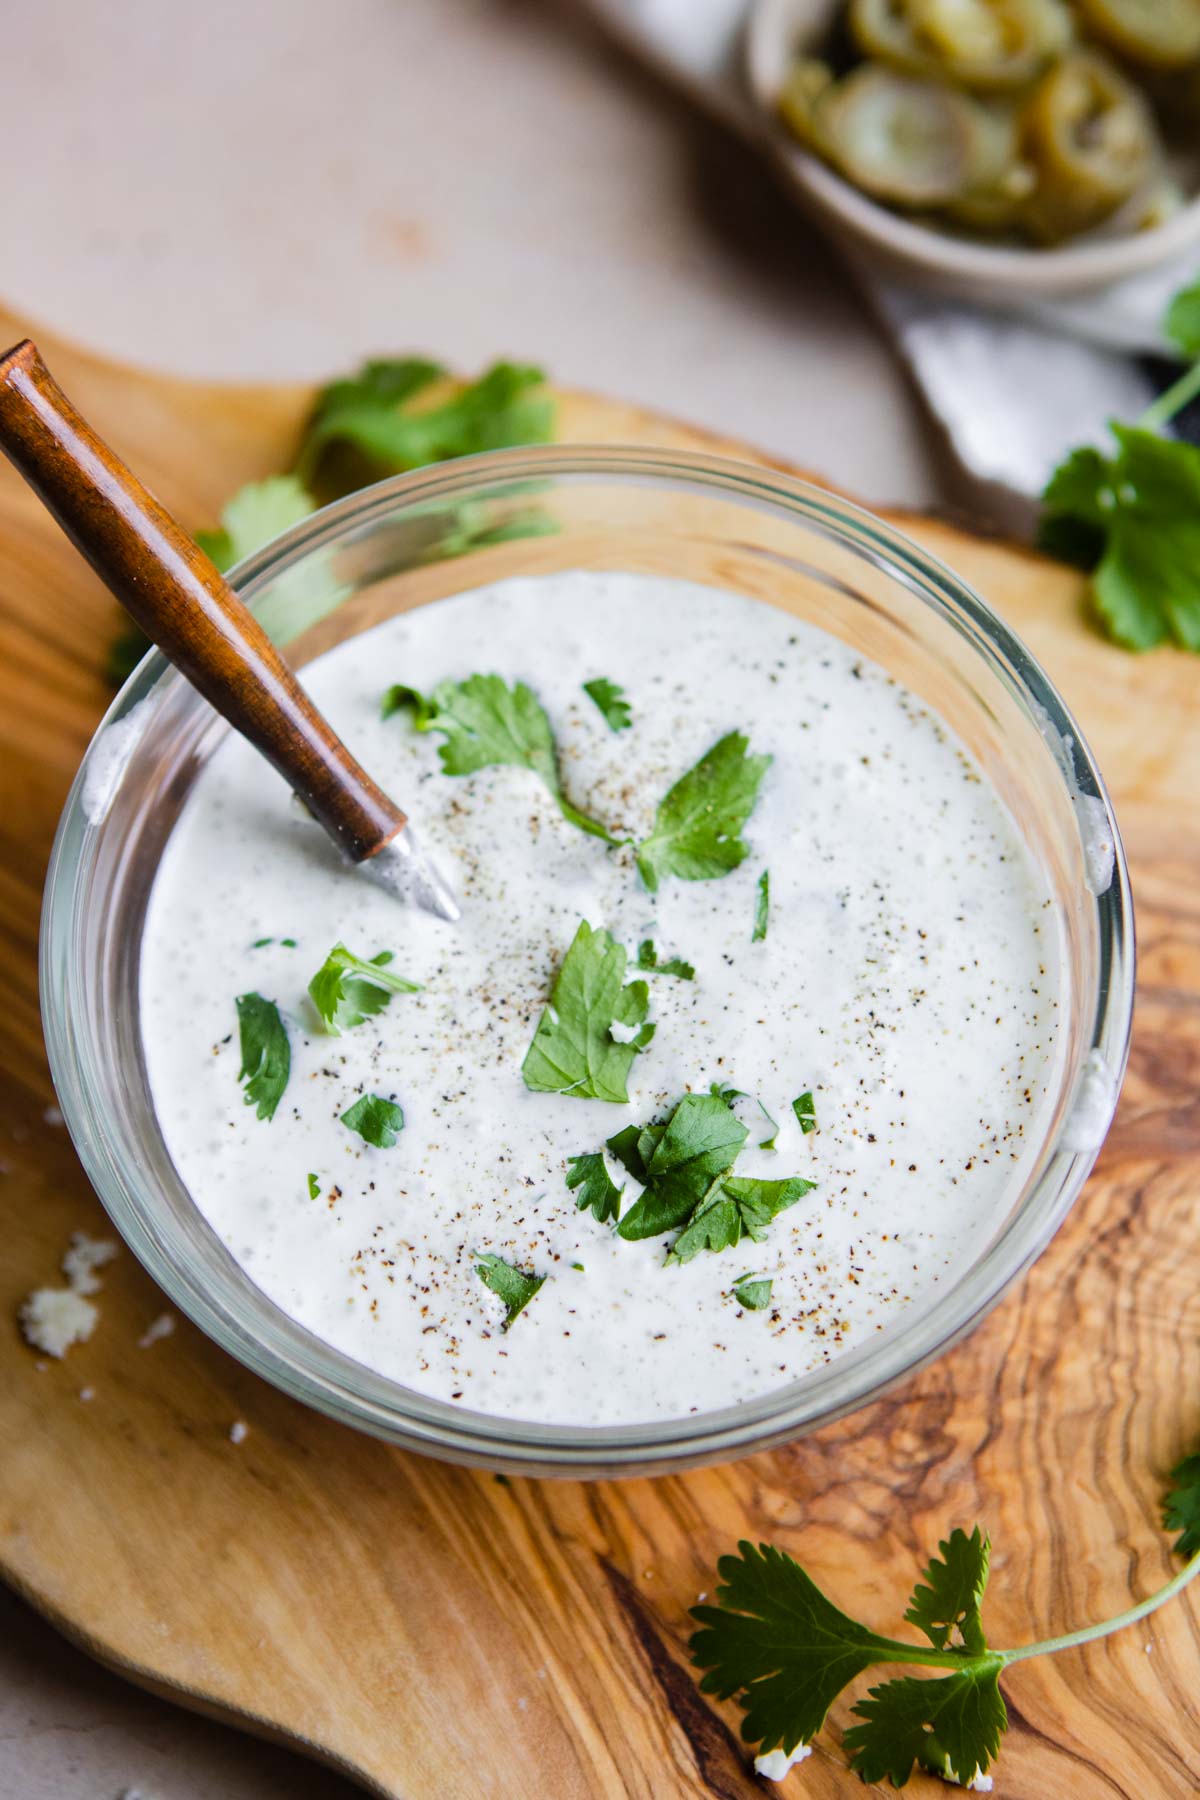 Homemade Zesty Ranch Sauce and Dressing - A Zest for Life